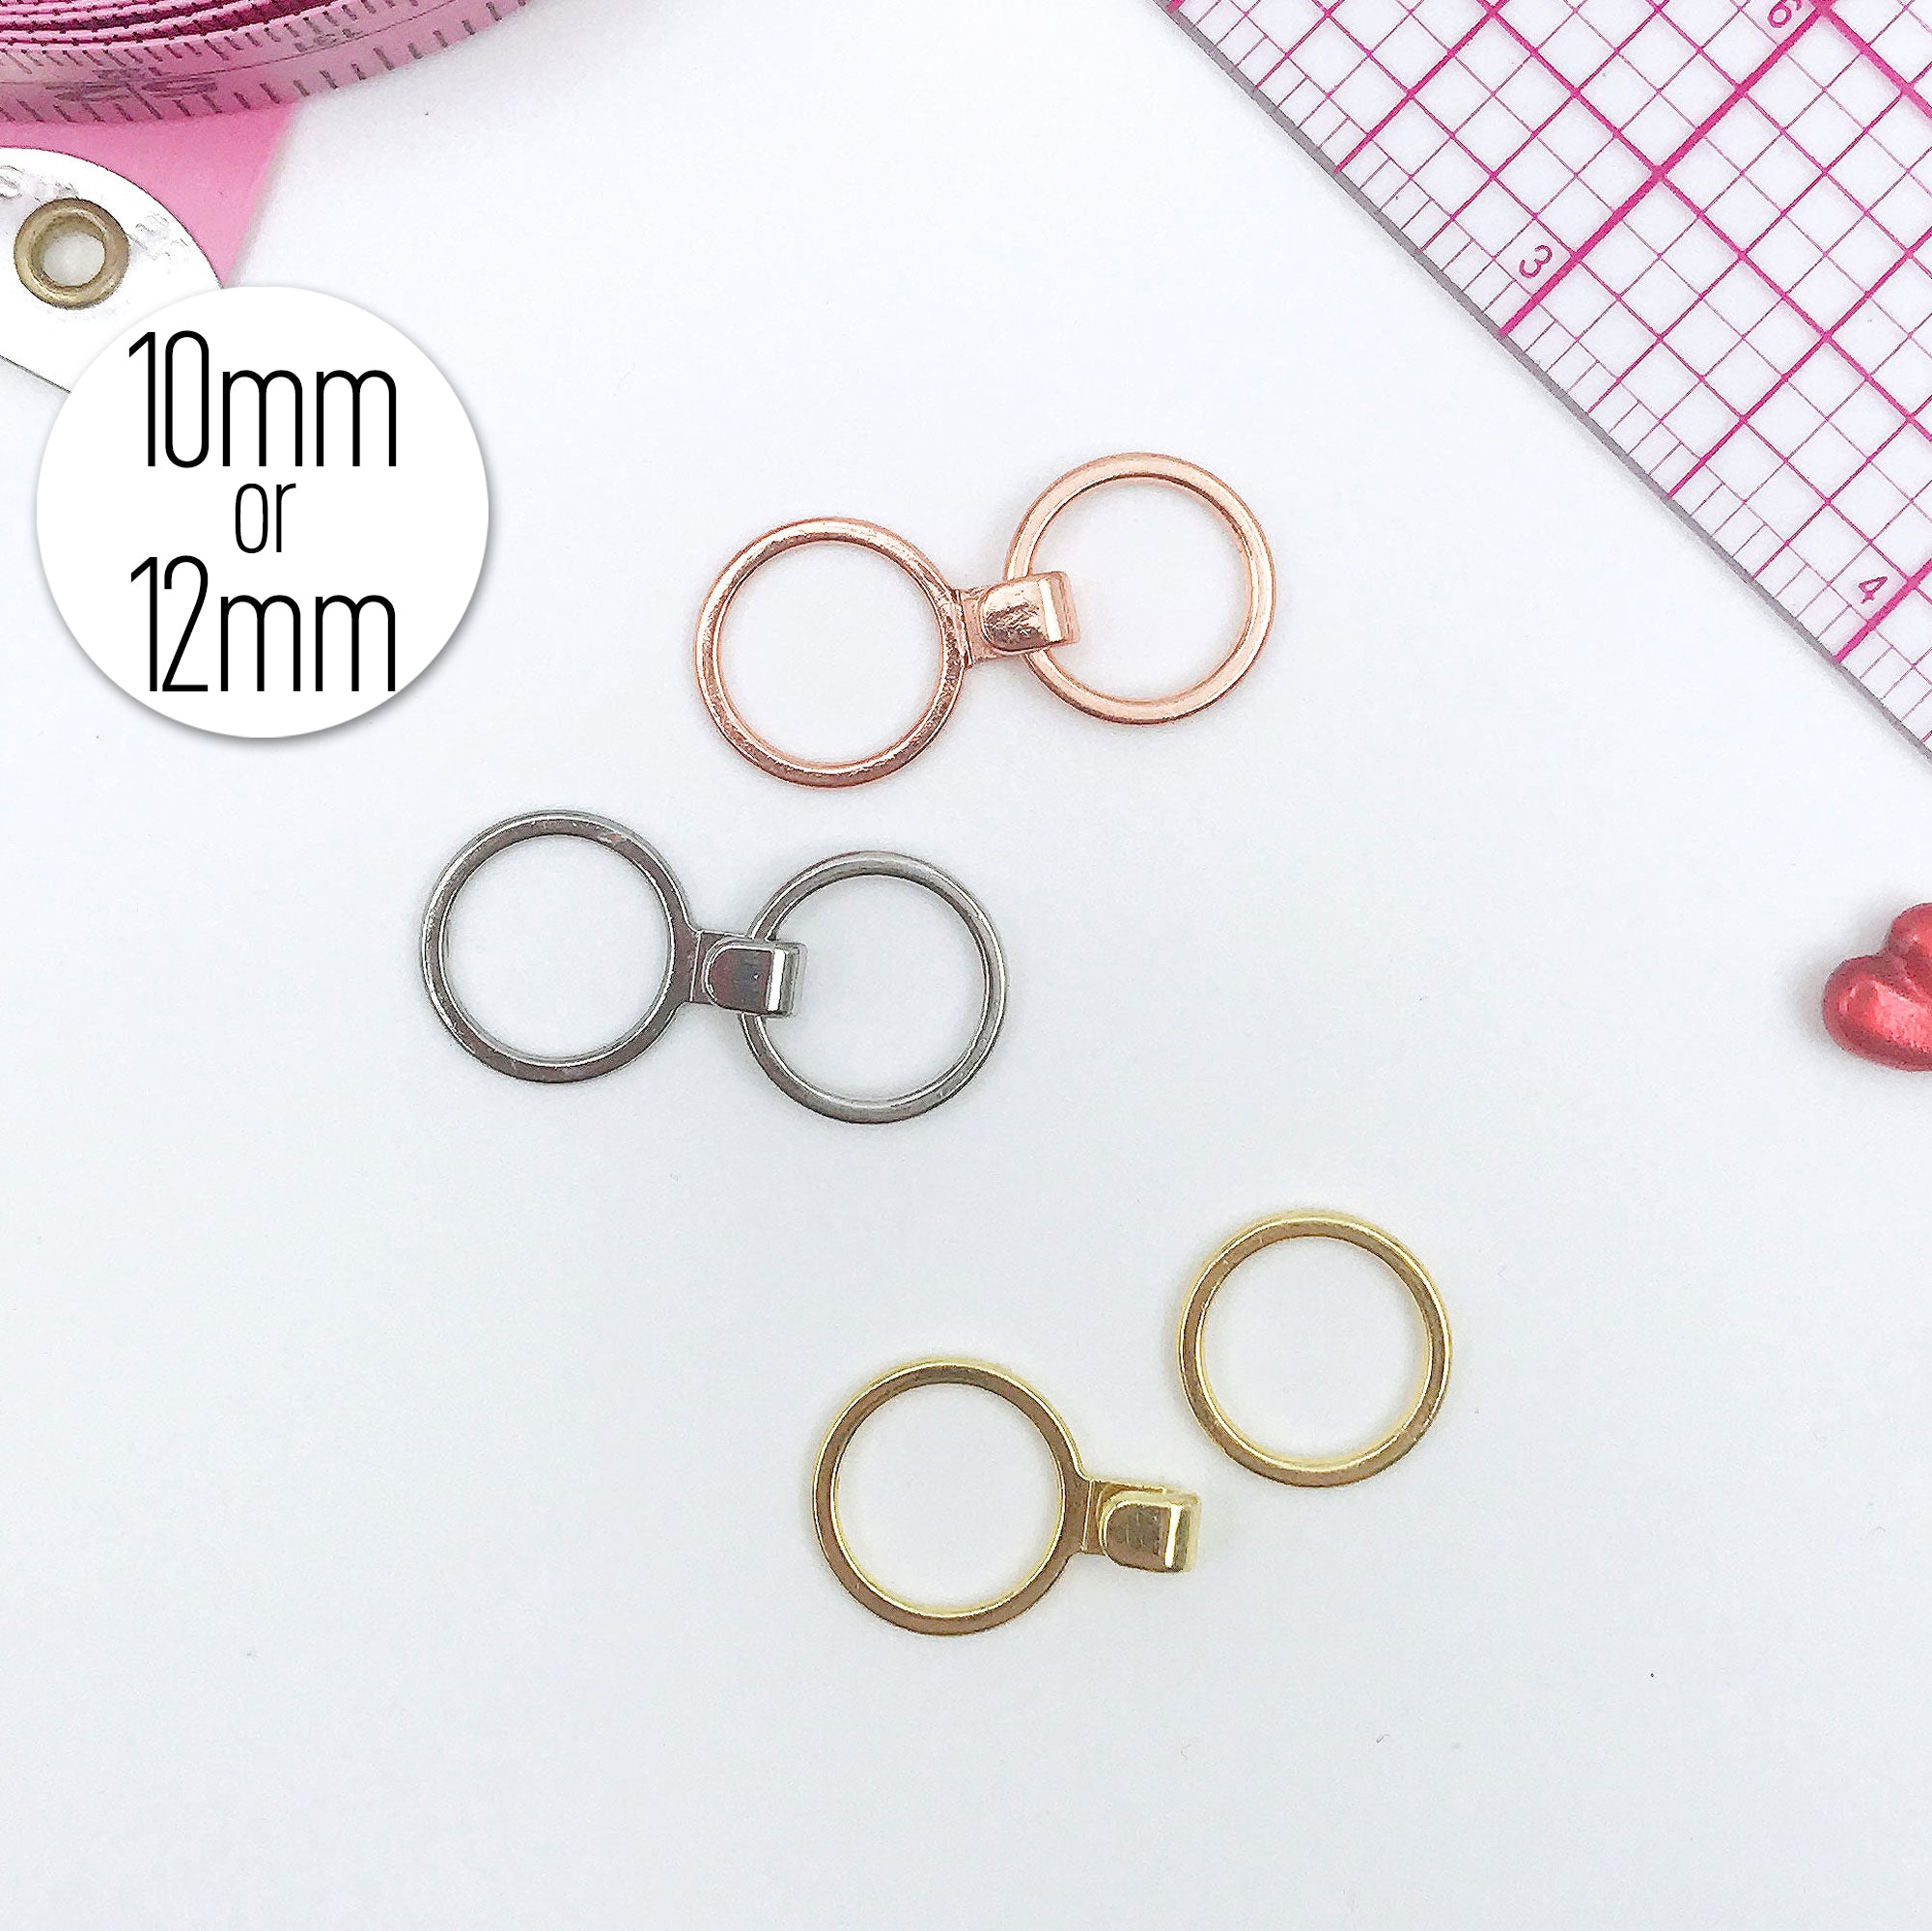 1/2" (12mm) or 3/8" (10mm) J-Hook with ring Set, Converts Bra into a Racer Back